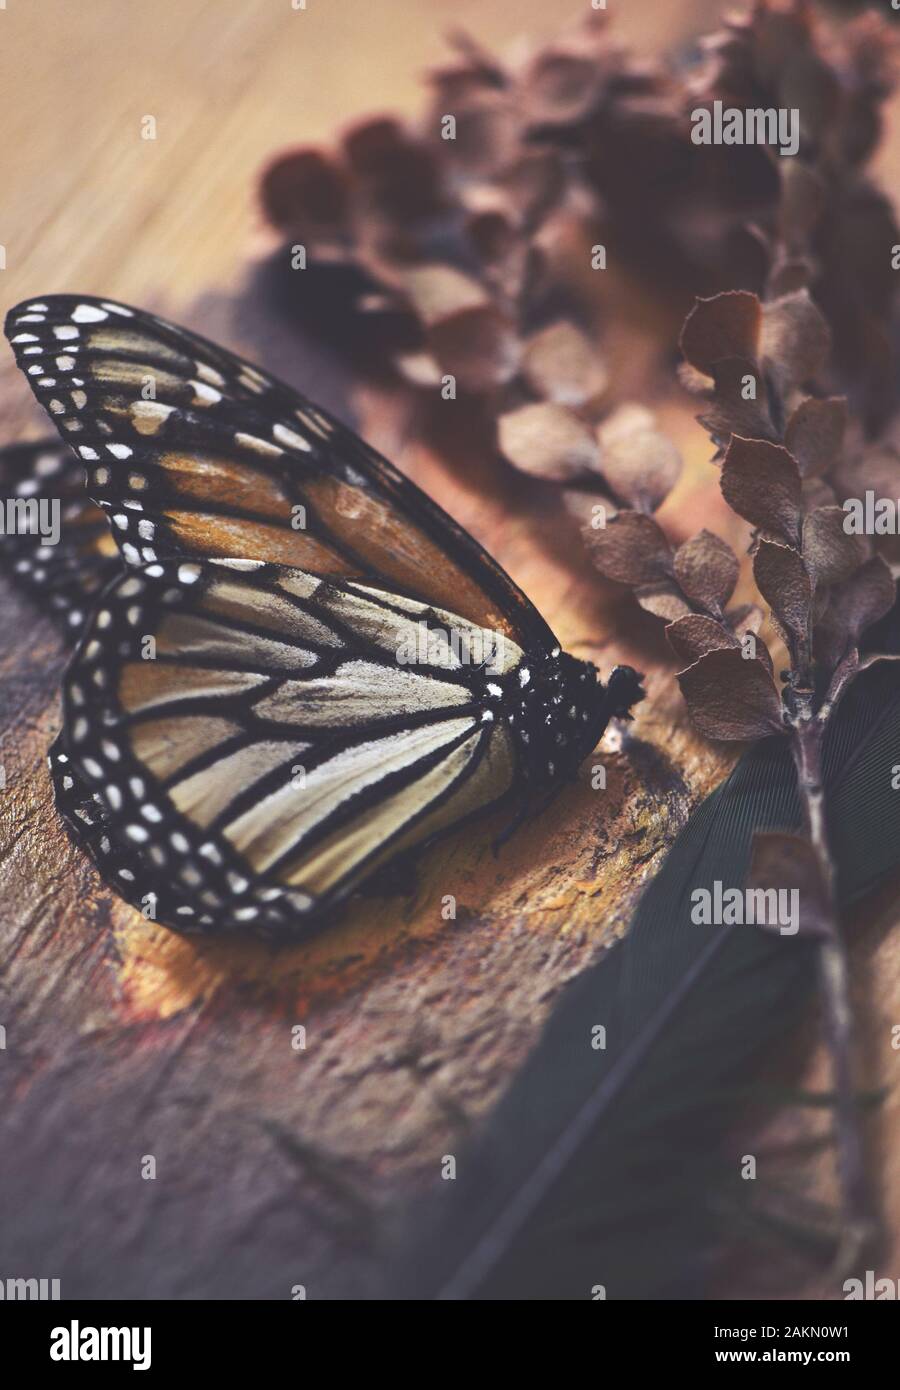 Vintage still life scene of a dead butterfly, feather and dried pressed plant on rustic aged wood background. Selective focus on butterfly body. Natur Stock Photo